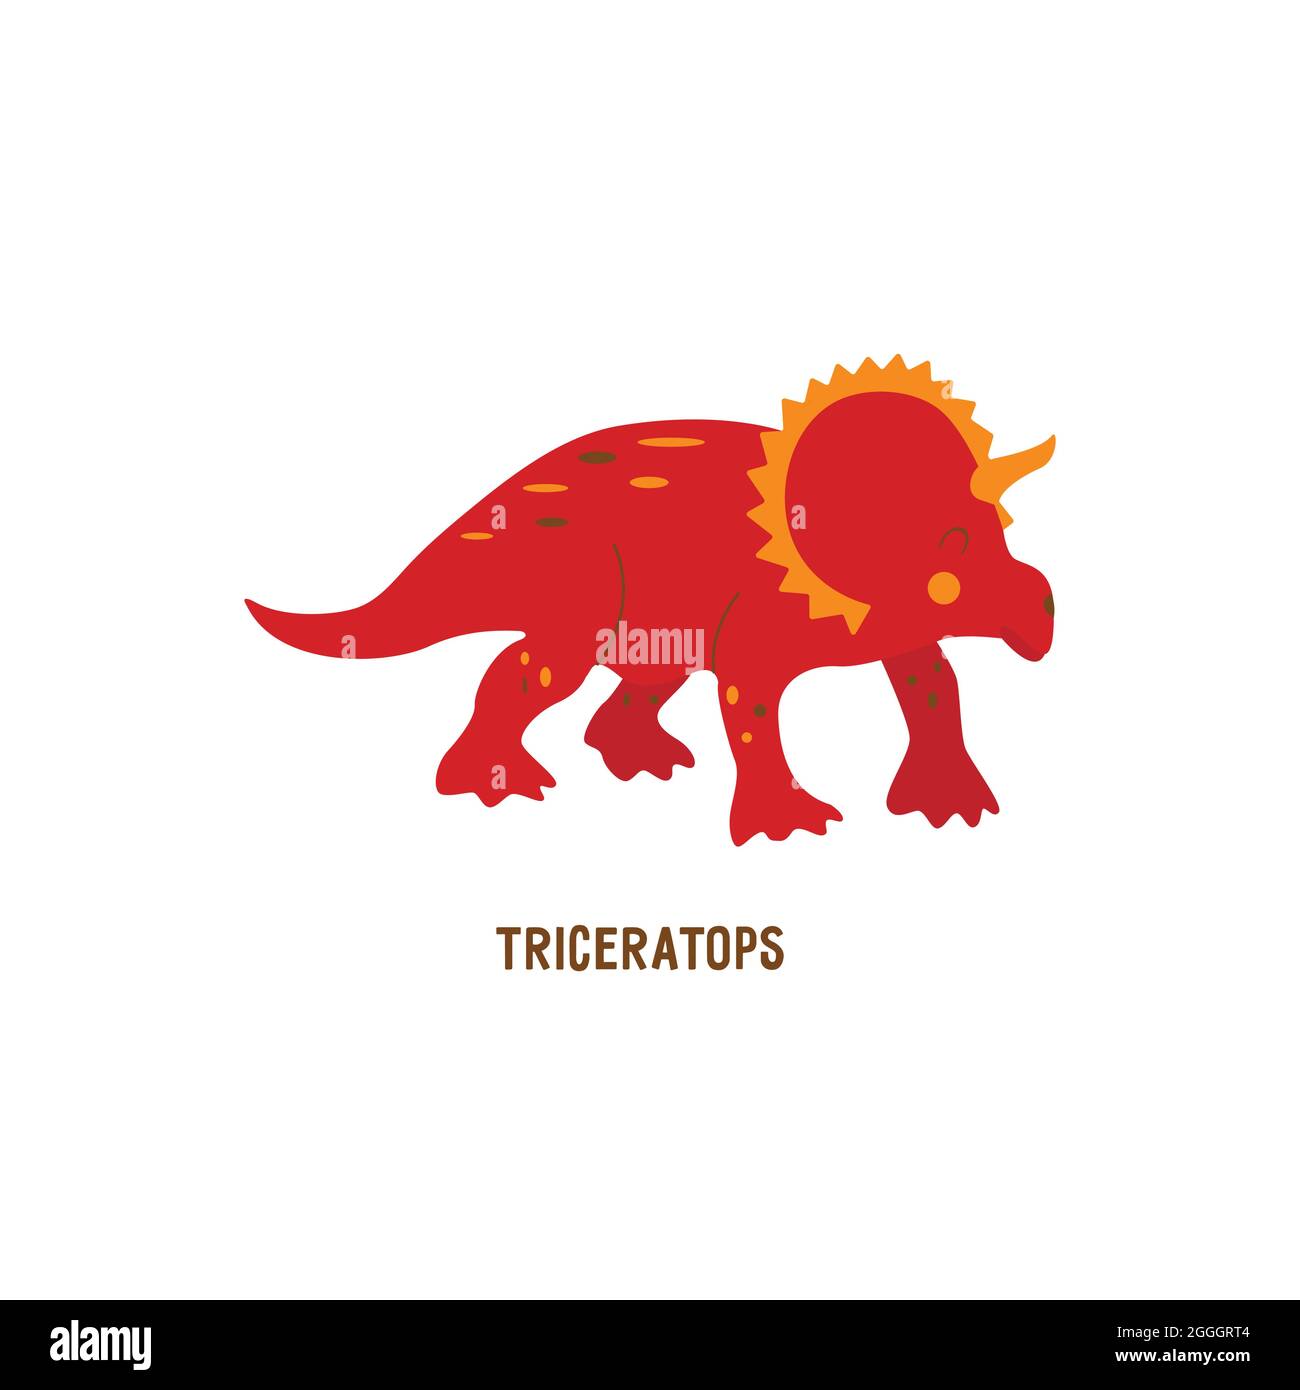 Jurassic period Stock Vector Images - Alamy